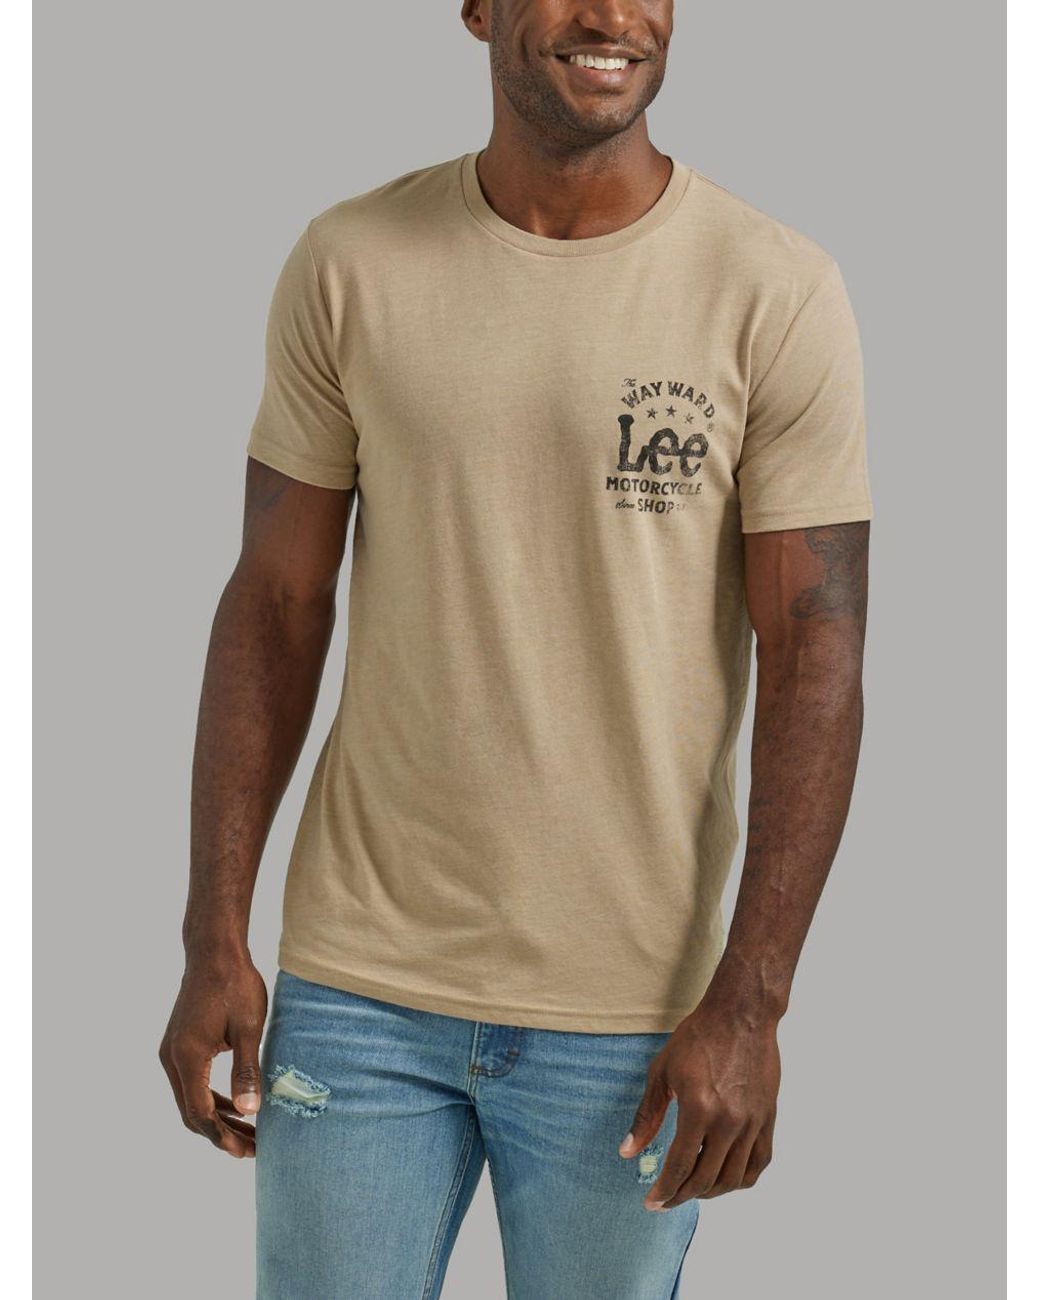 Lee Jeans Mens Motorcycle Shop Graphic T-shirt in Natural for Men | Lyst